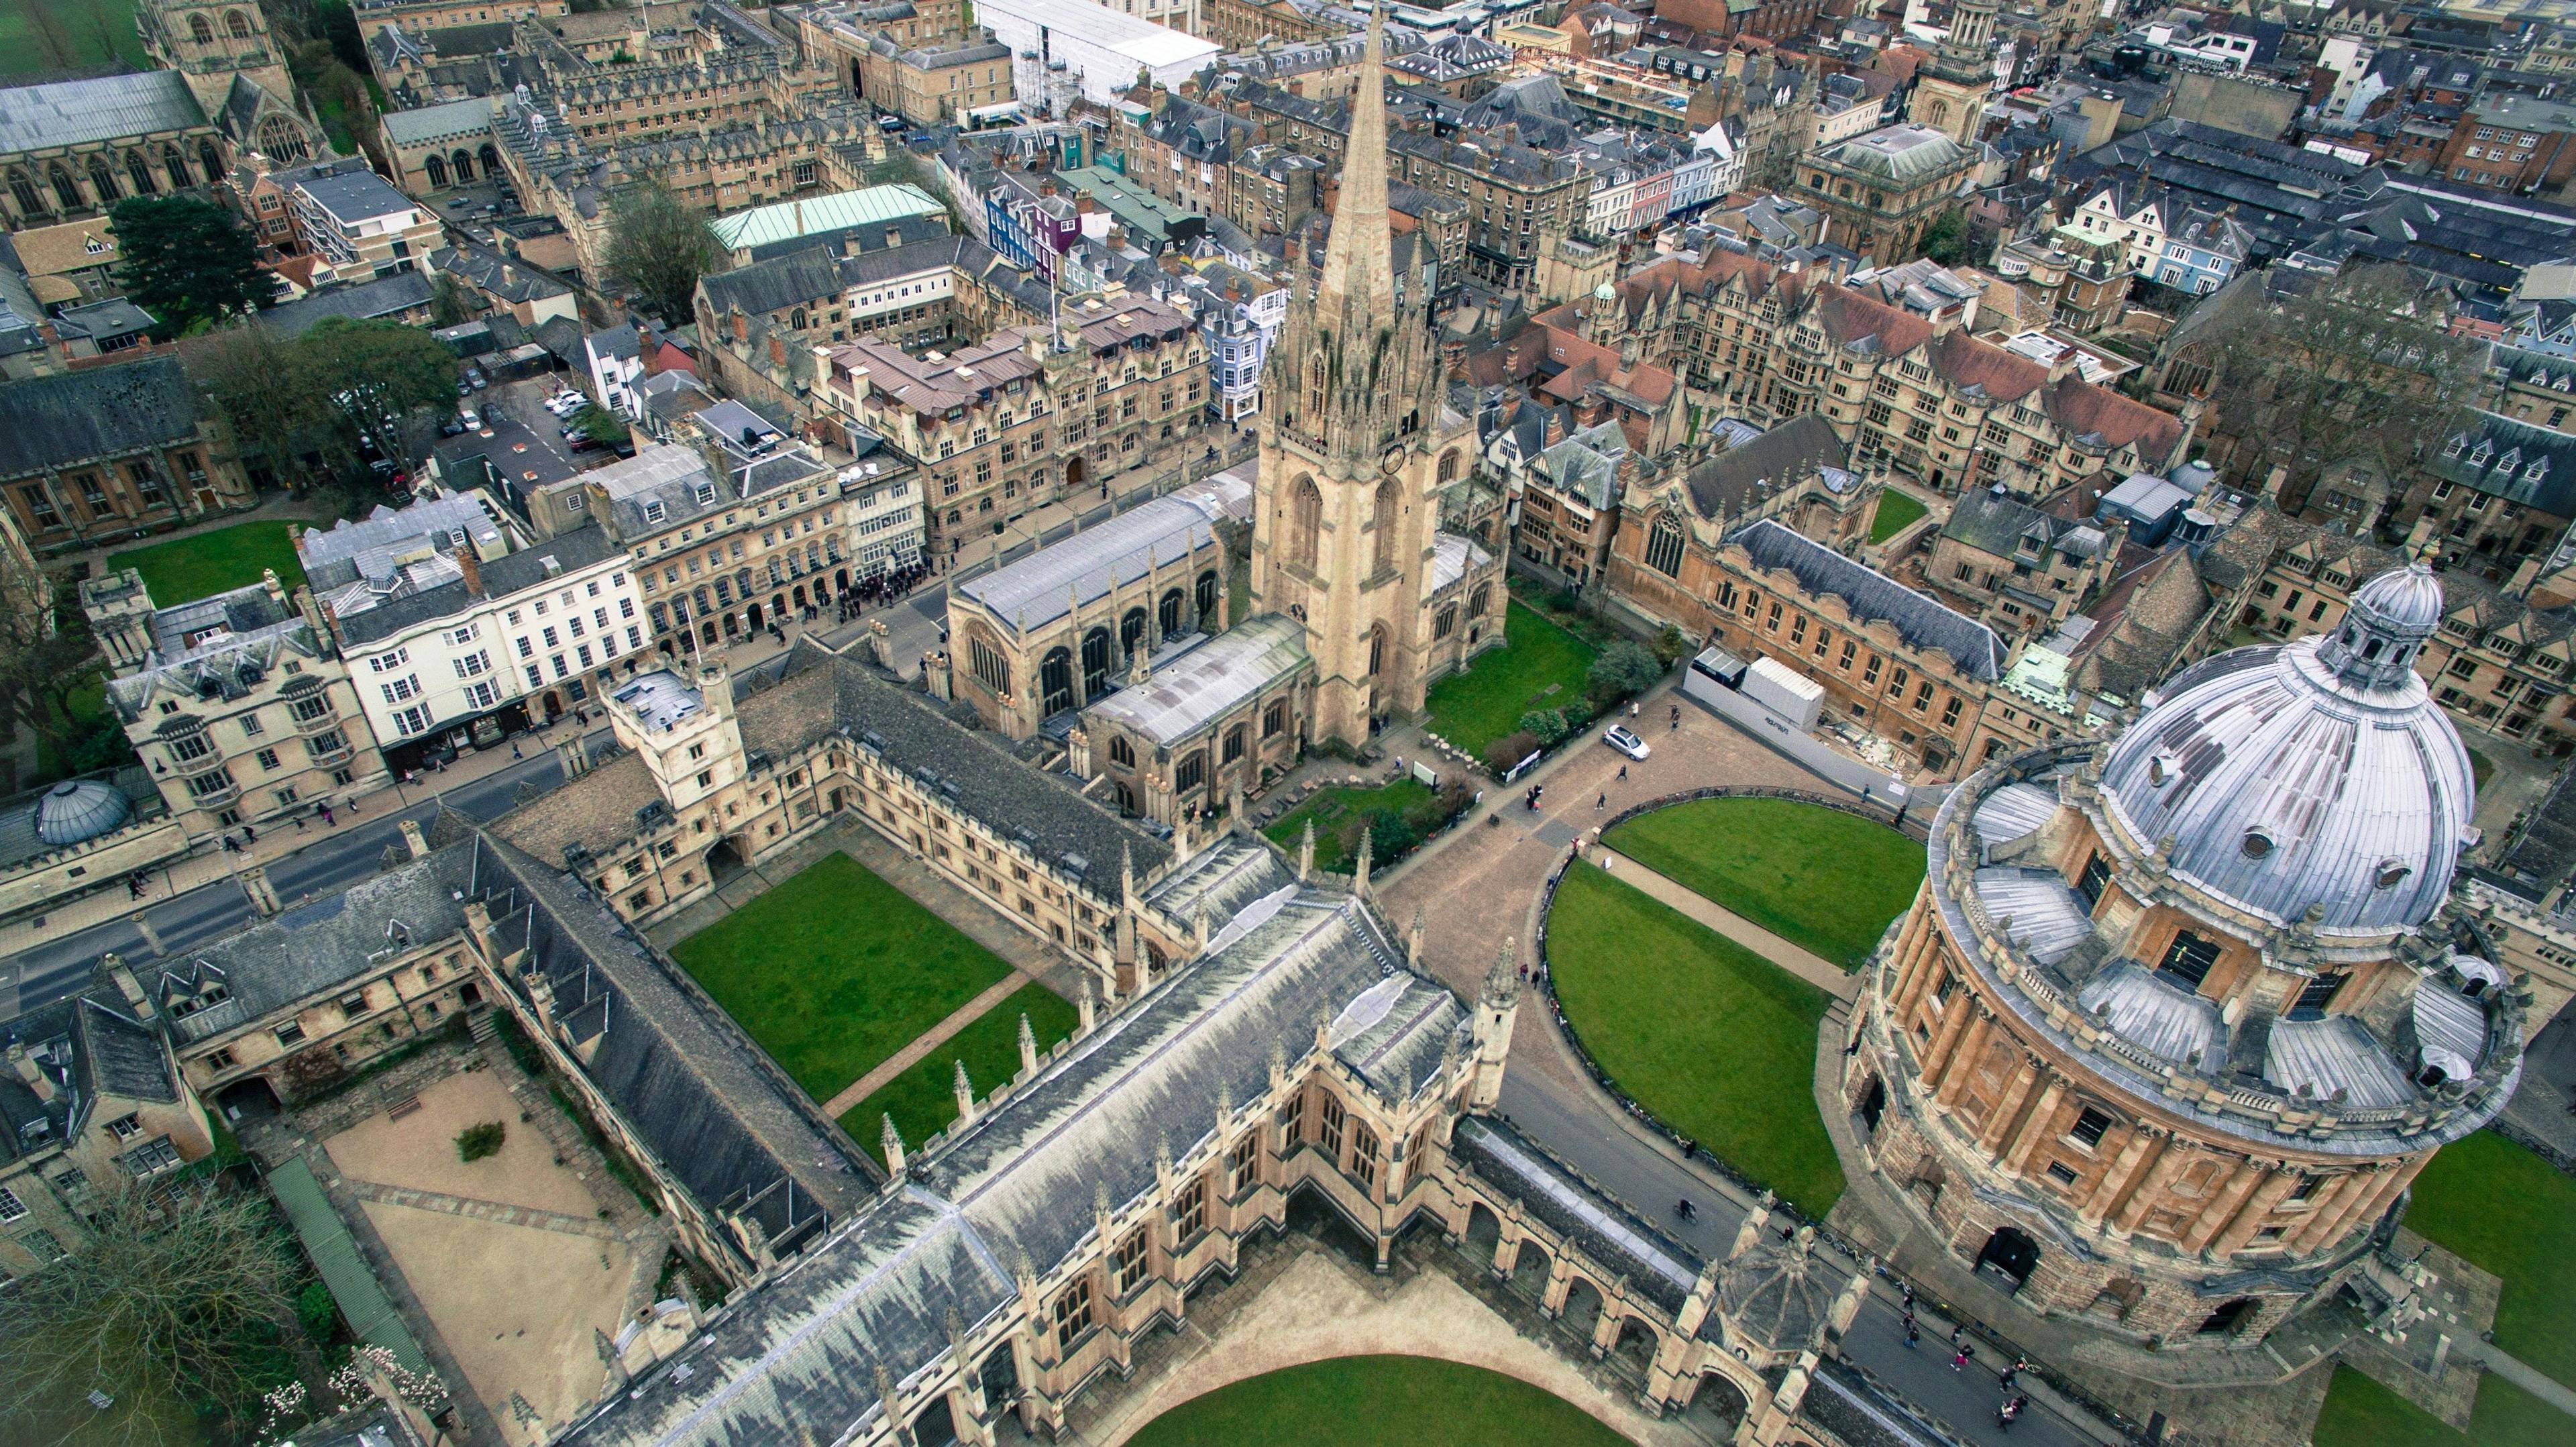 Aerial view of Oxford University with the Radcliffe Camera visible